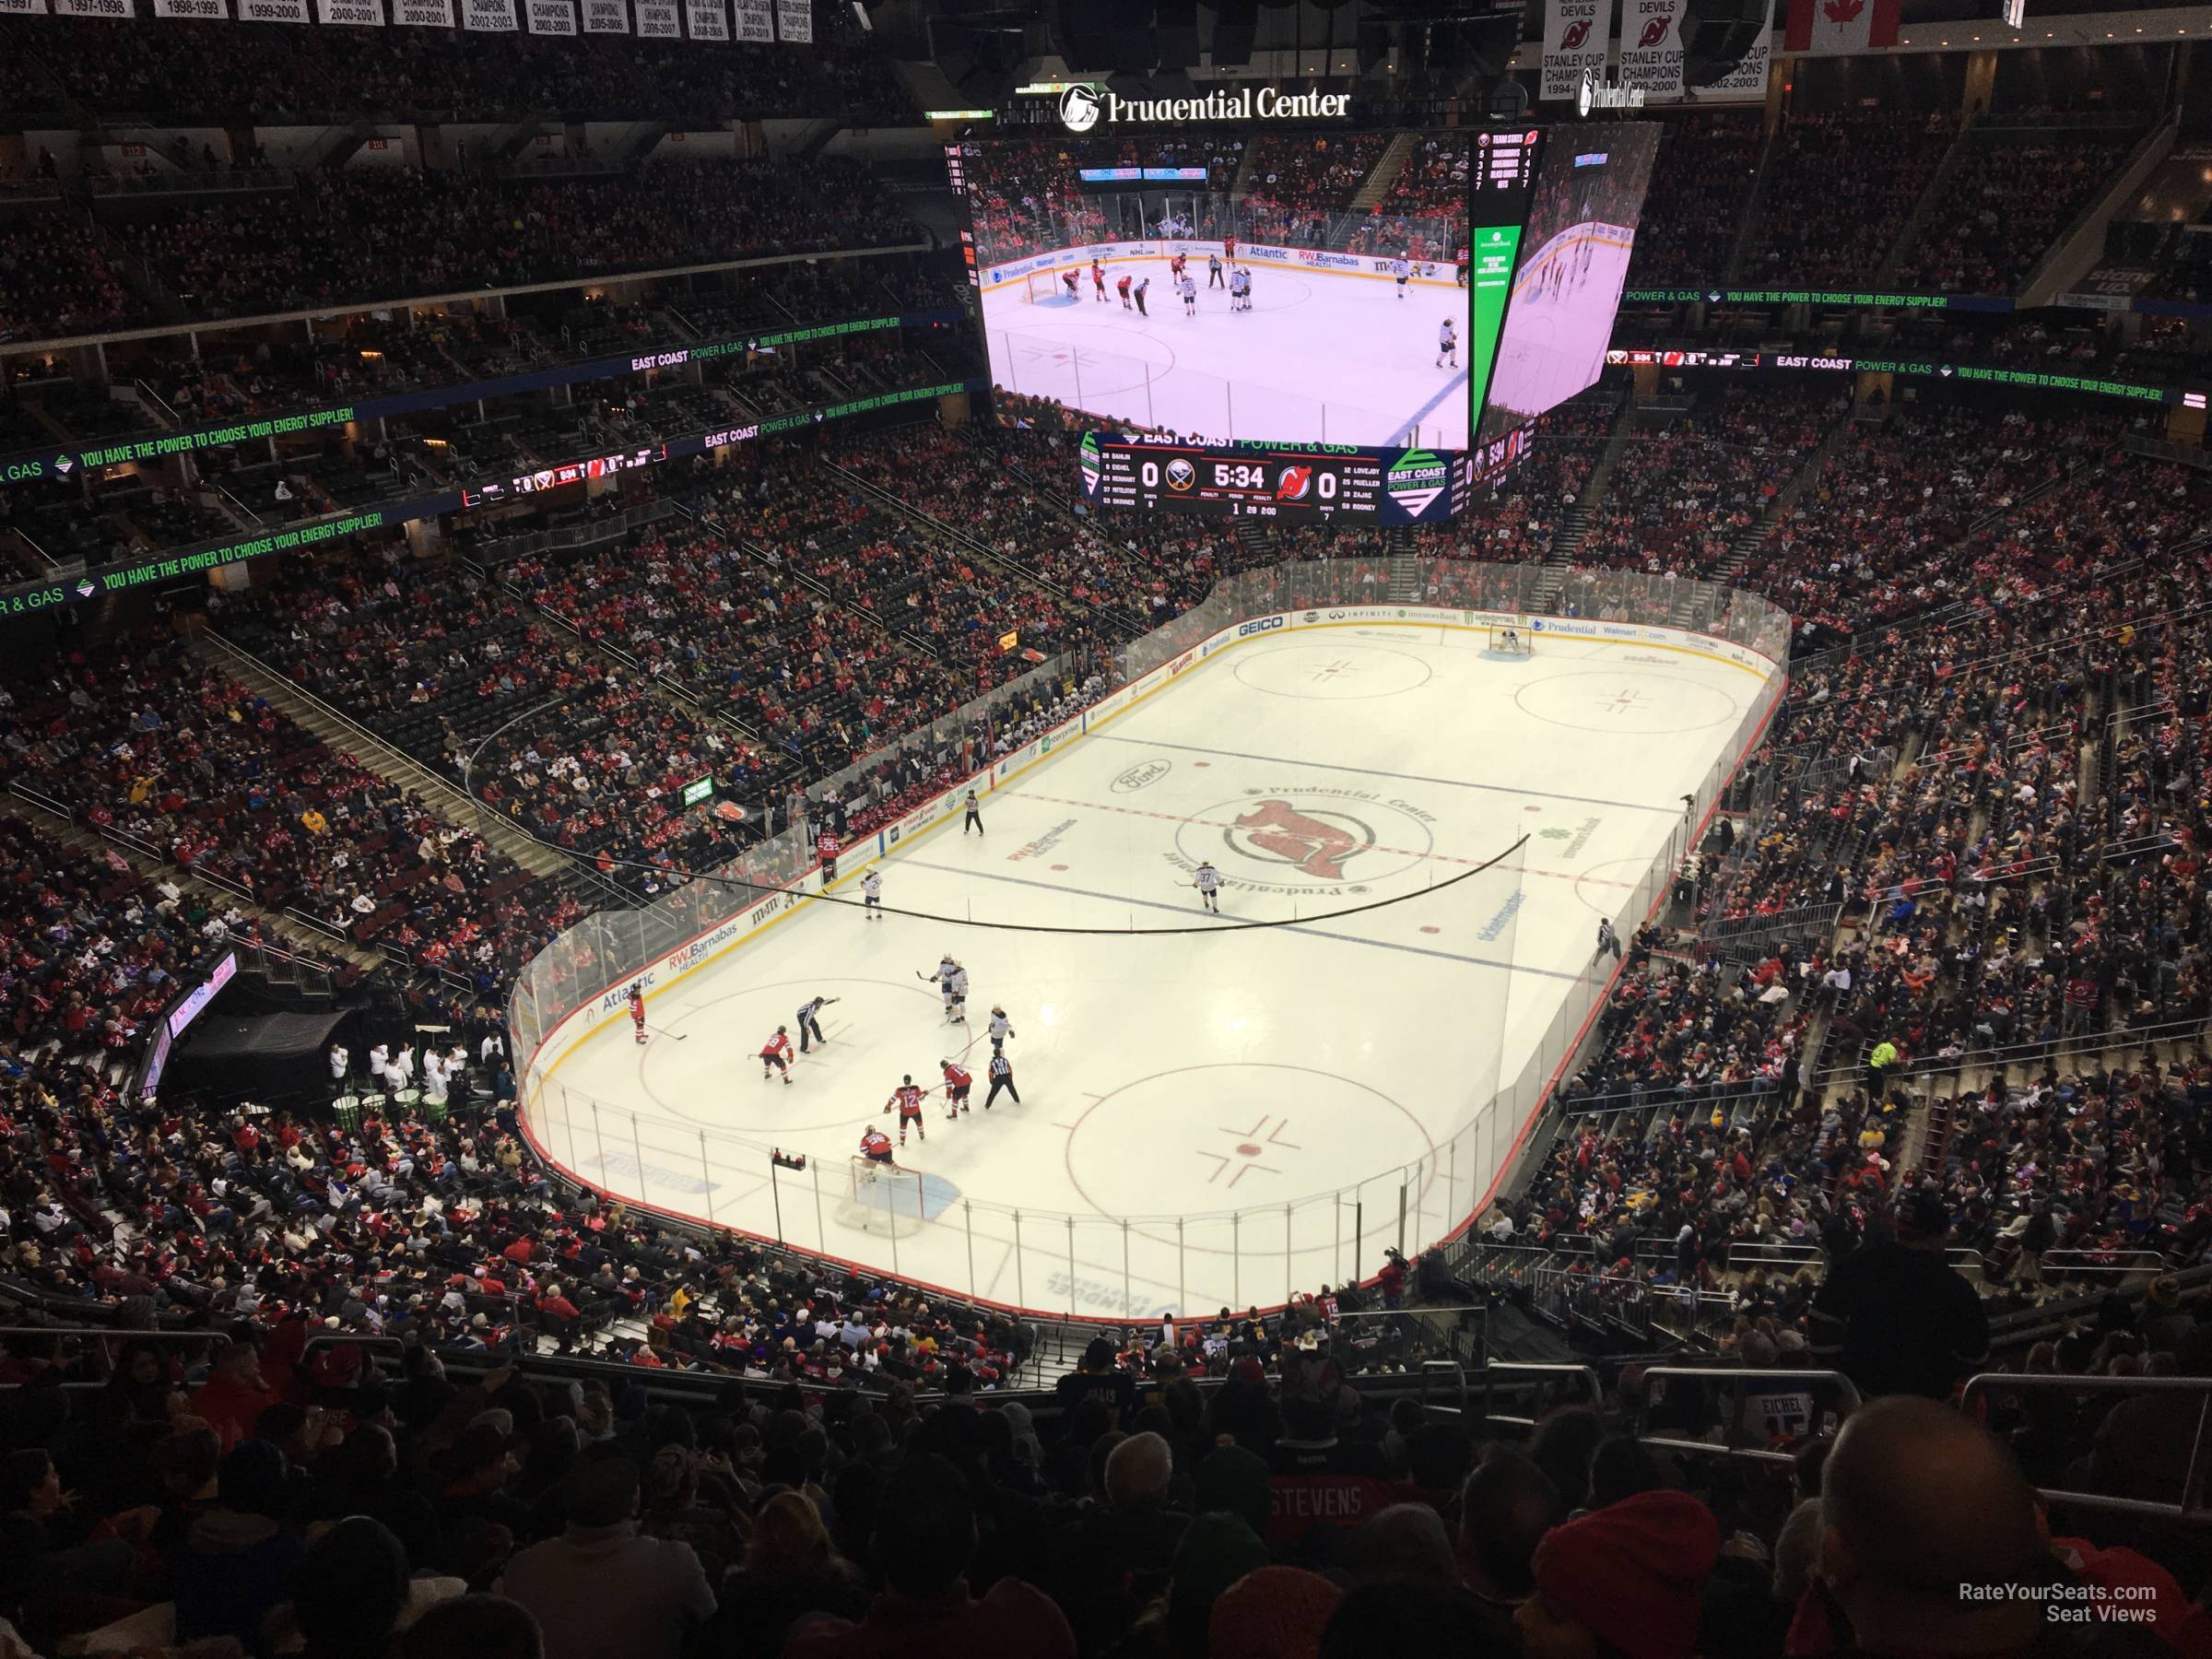 section 122, row 6 seat view  for hockey - prudential center